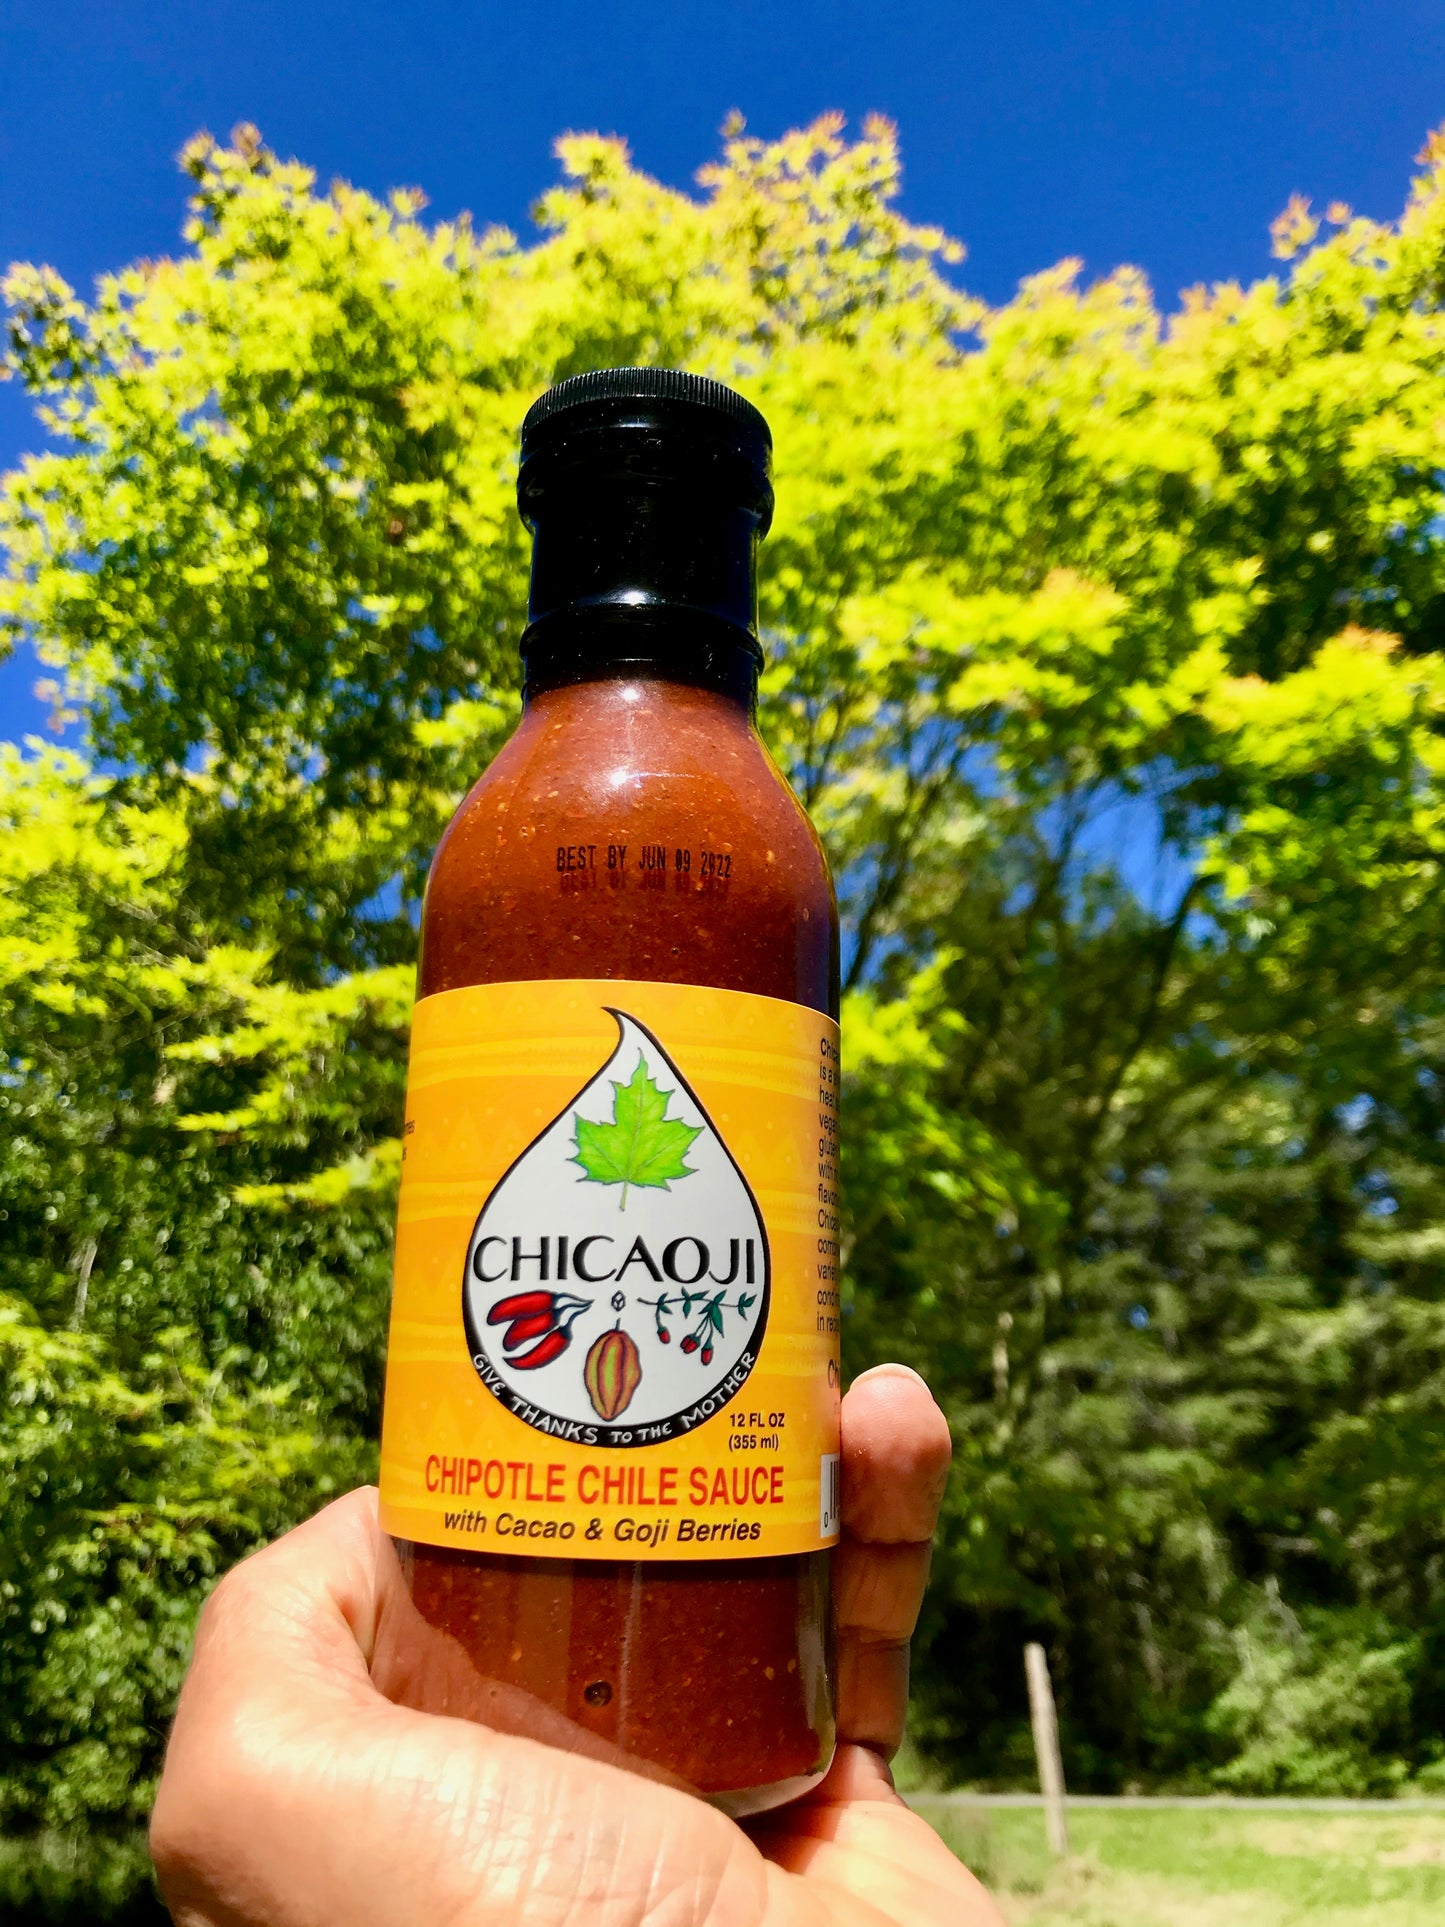 Glass bottle held by a hand in front of green trees and blue sky. The bottle is filled with red hot sauce and has a yellow label and black top. The label has a white teardrop with the symbols for a maple leaf, chili peppers, a cacao pod, and some berries. It says, "Chicaoji: Chipotle Chili Sauce with Cacao & Goji Berries"